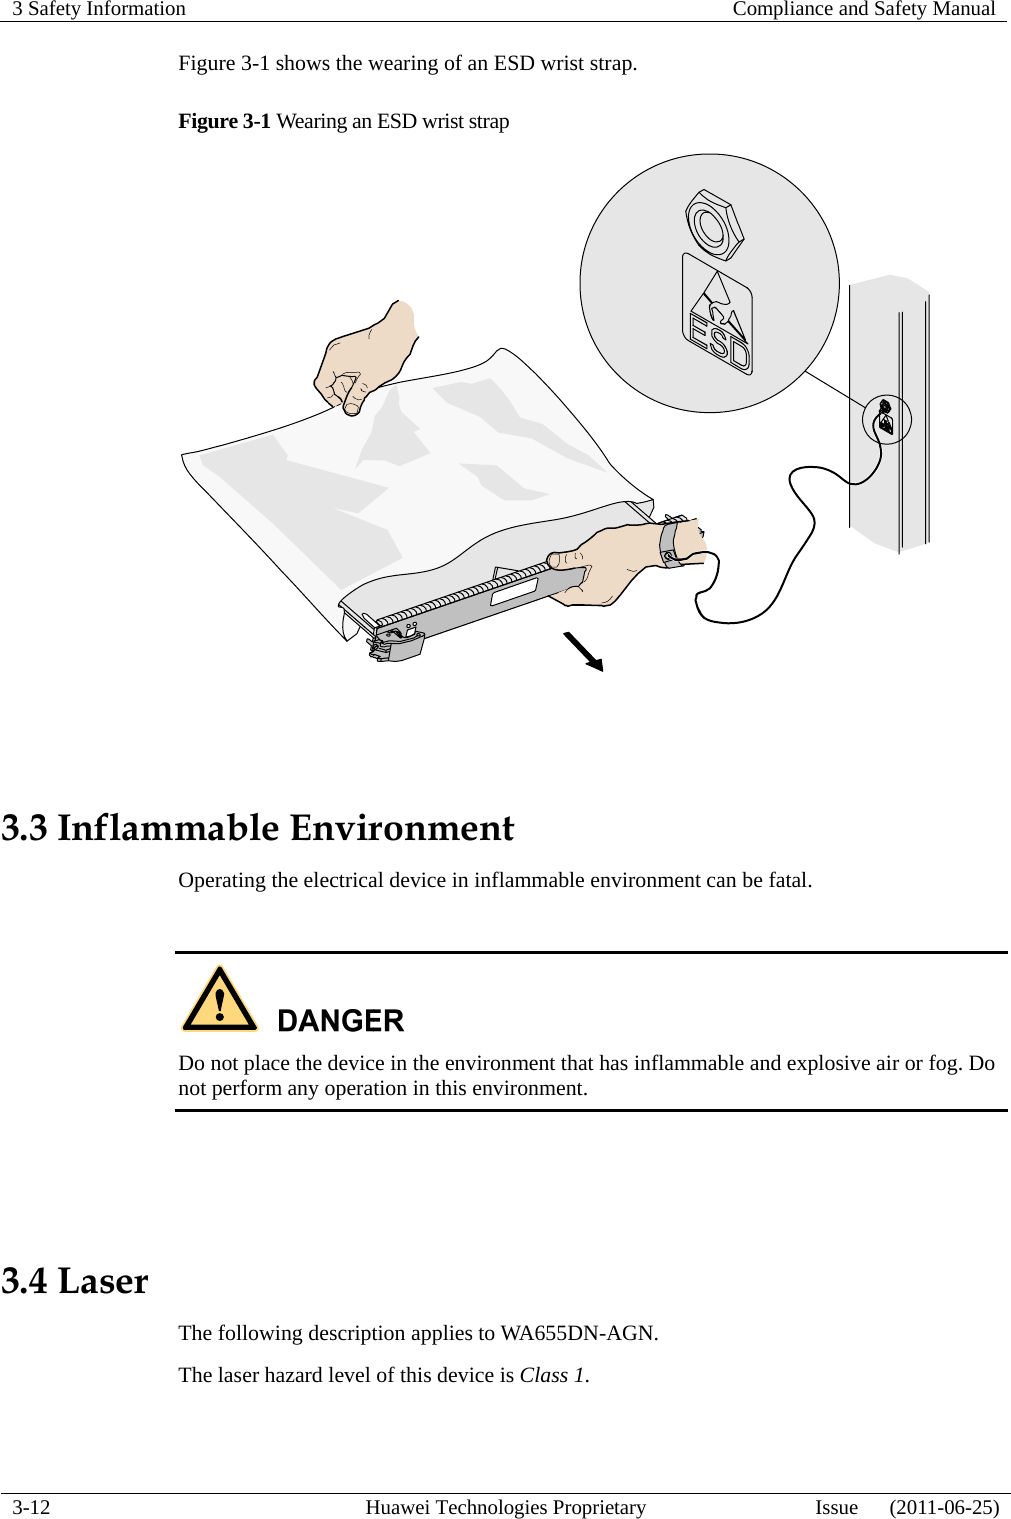 3 Safety Information   Compliance and Safety Manual  3-12  Huawei Technologies Proprietary  Issue      (2011-06-25) Figure 3-1 shows the wearing of an ESD wrist strap. Figure 3-1 Wearing an ESD wrist strap   3.3 Inflammable Environment Operating the electrical device in inflammable environment can be fatal.   Do not place the device in the environment that has inflammable and explosive air or fog. Do not perform any operation in this environment.   3.4 Laser The following description applies to WA655DN-AGN. The laser hazard level of this device is Class 1.  